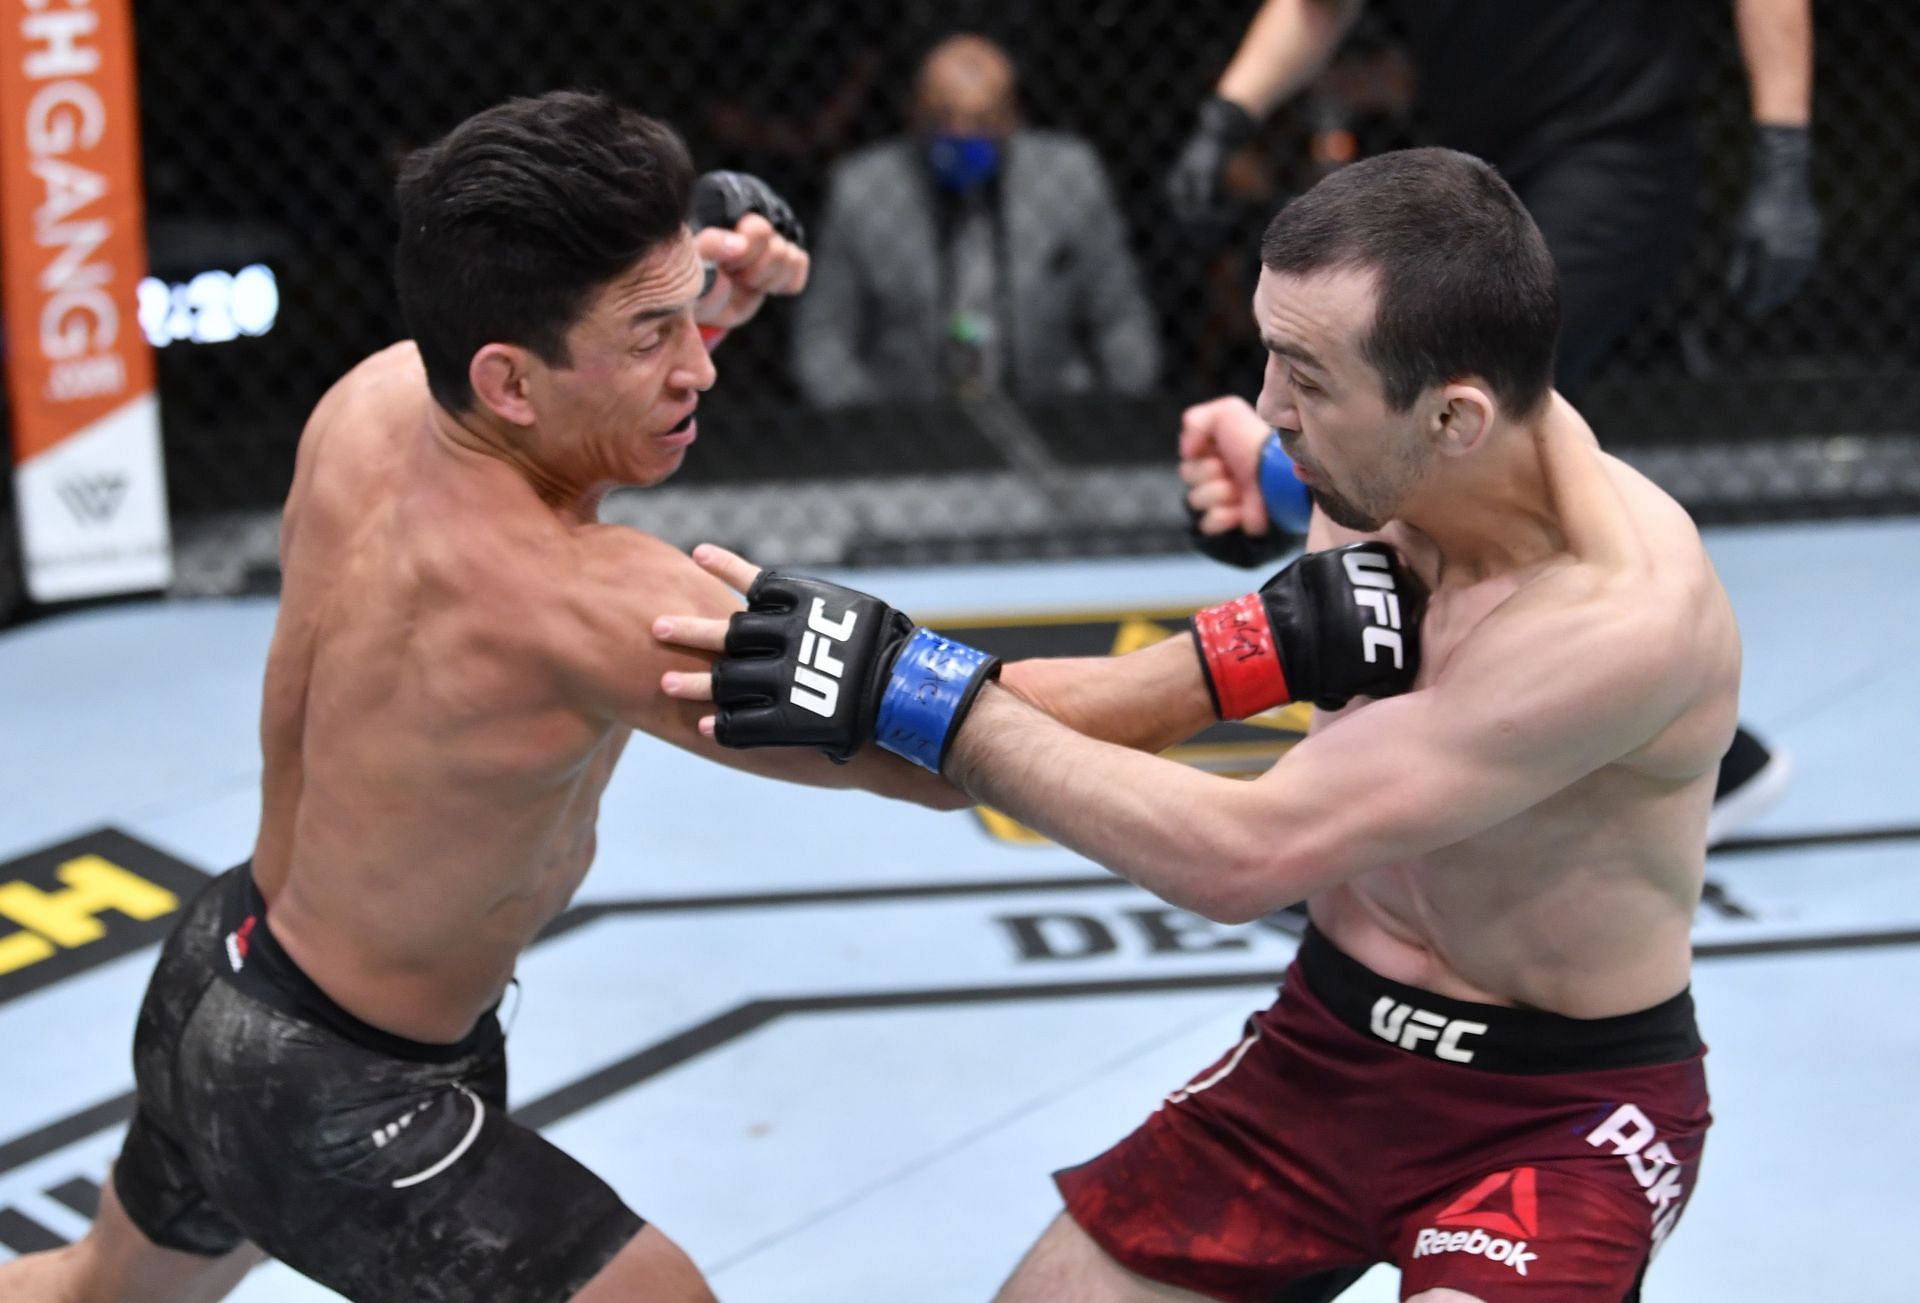 Joseph Benavidez (left) was violently finished by Demetrious Johnson in their rematch